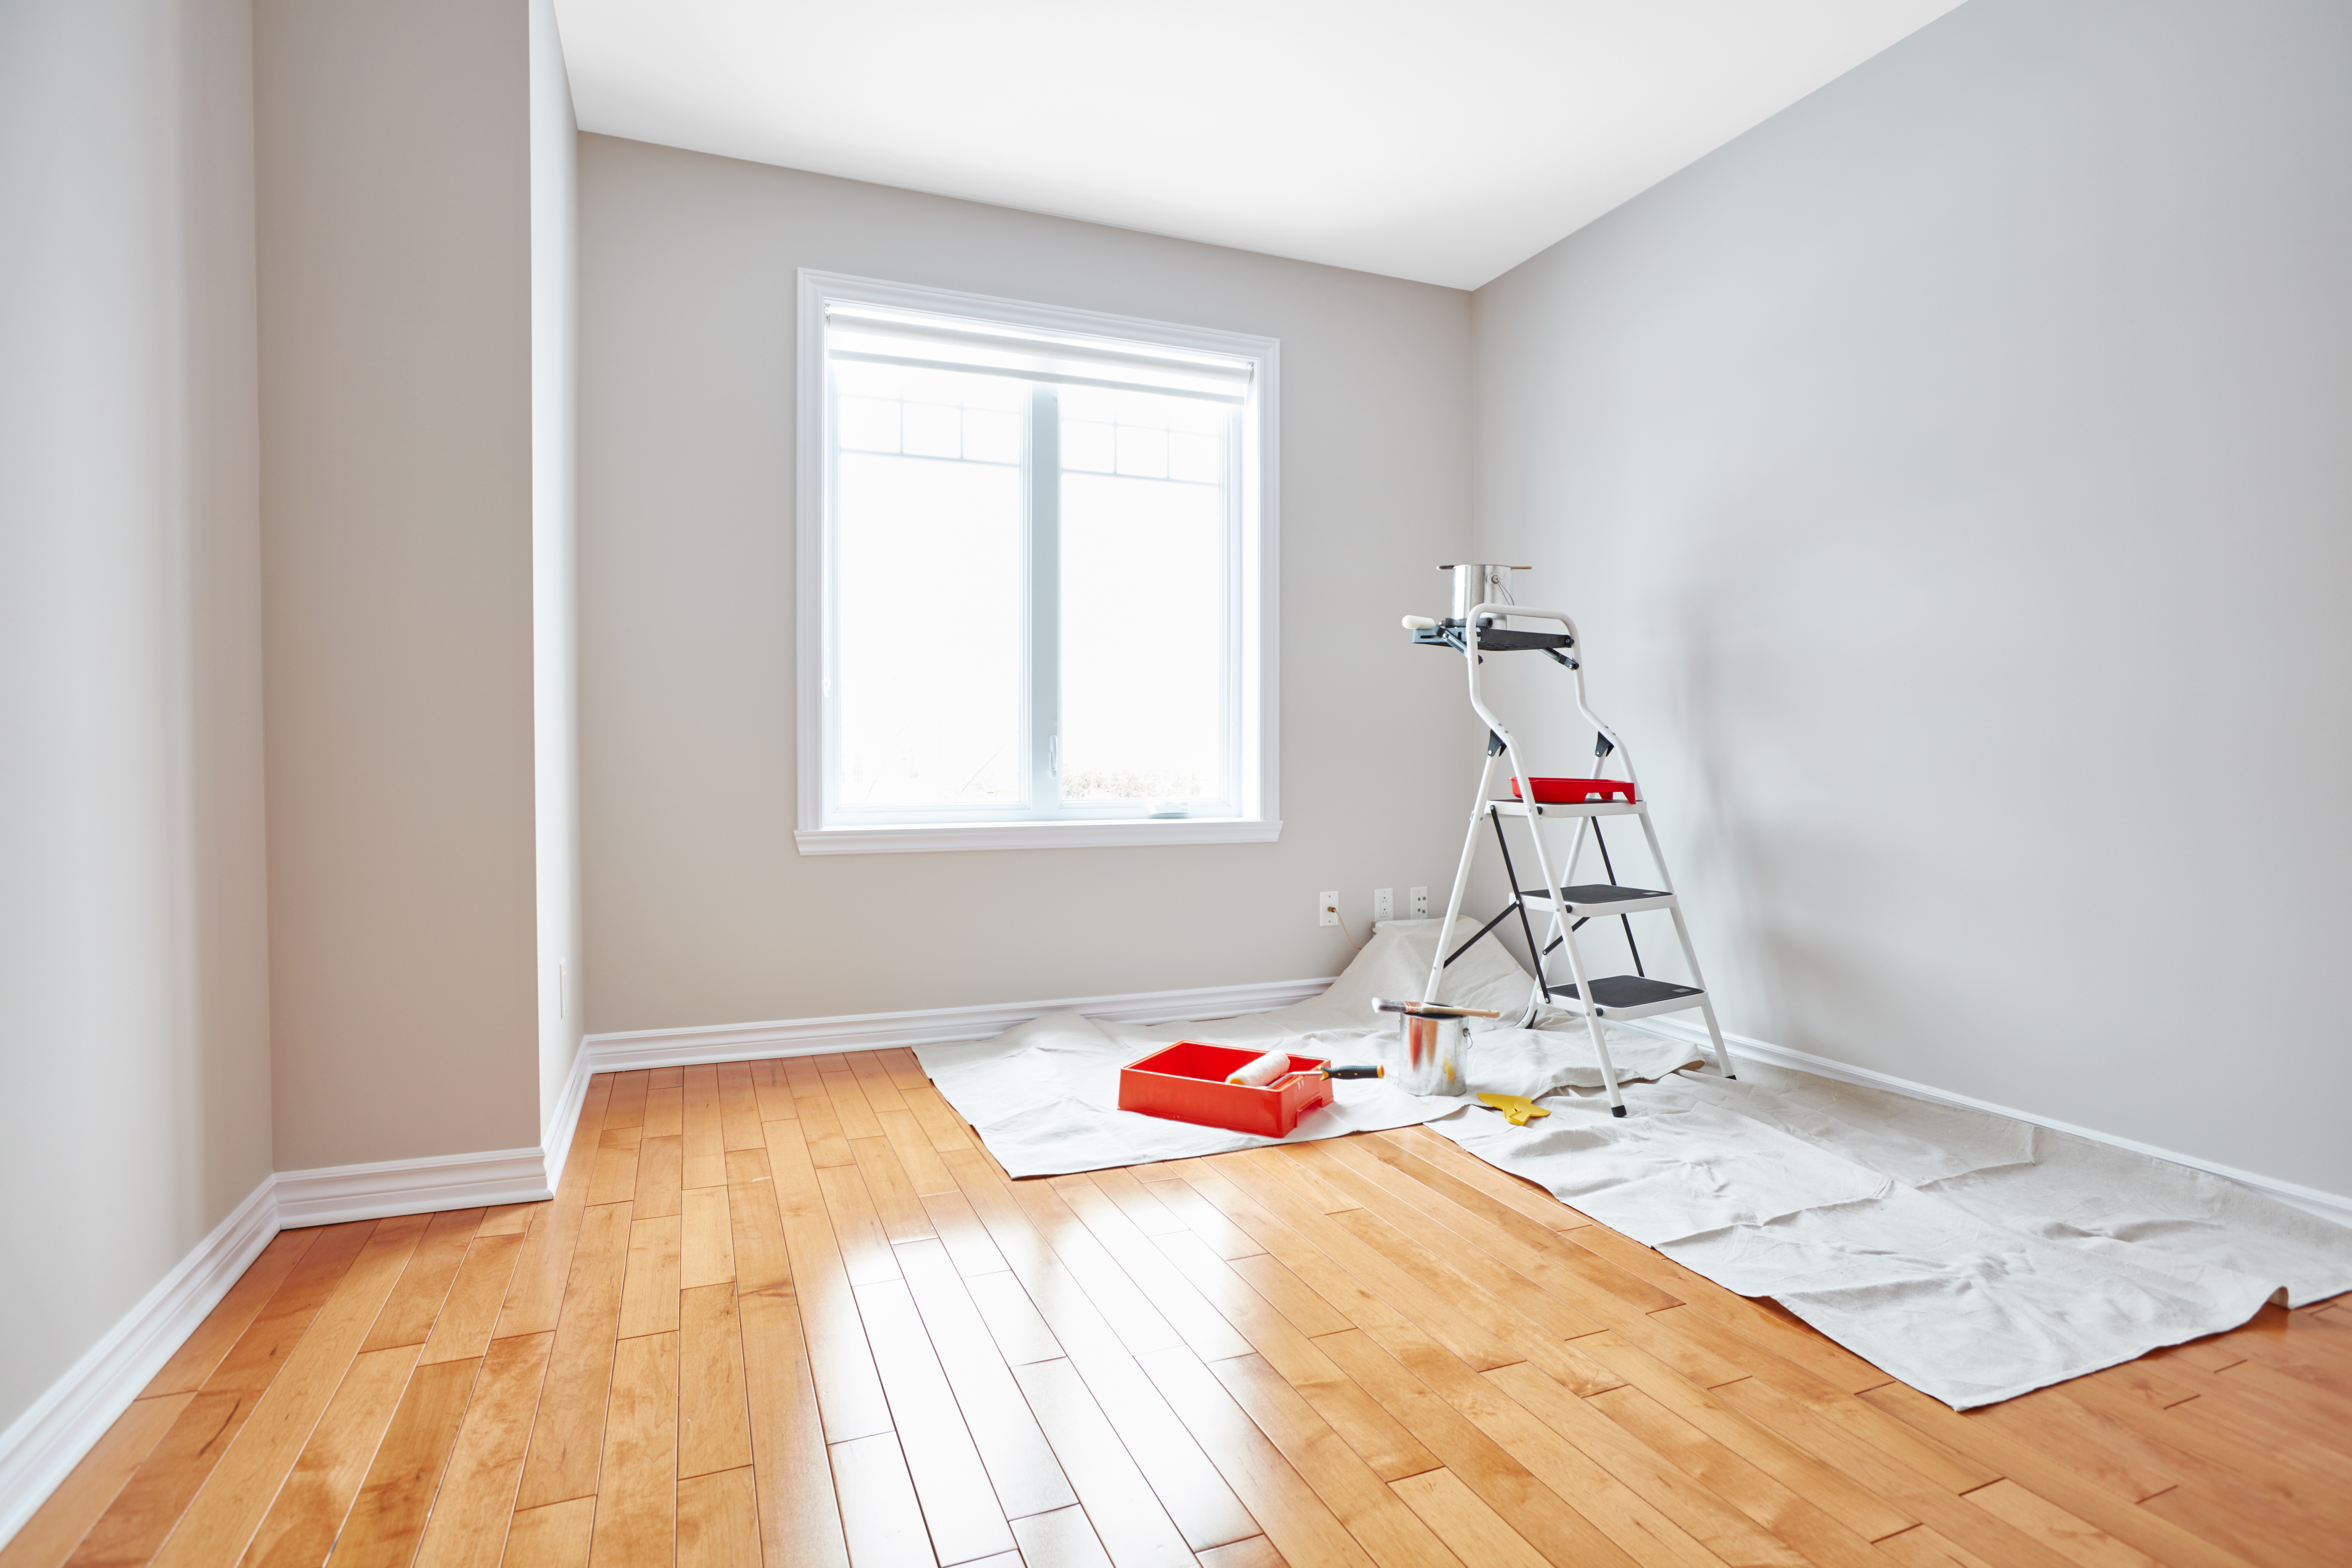 A vacant room with hardwood floors, a ladder and painting materials. Just as this room awaits a transformation, your painting business can undergo a digital makeover to attract more clients.